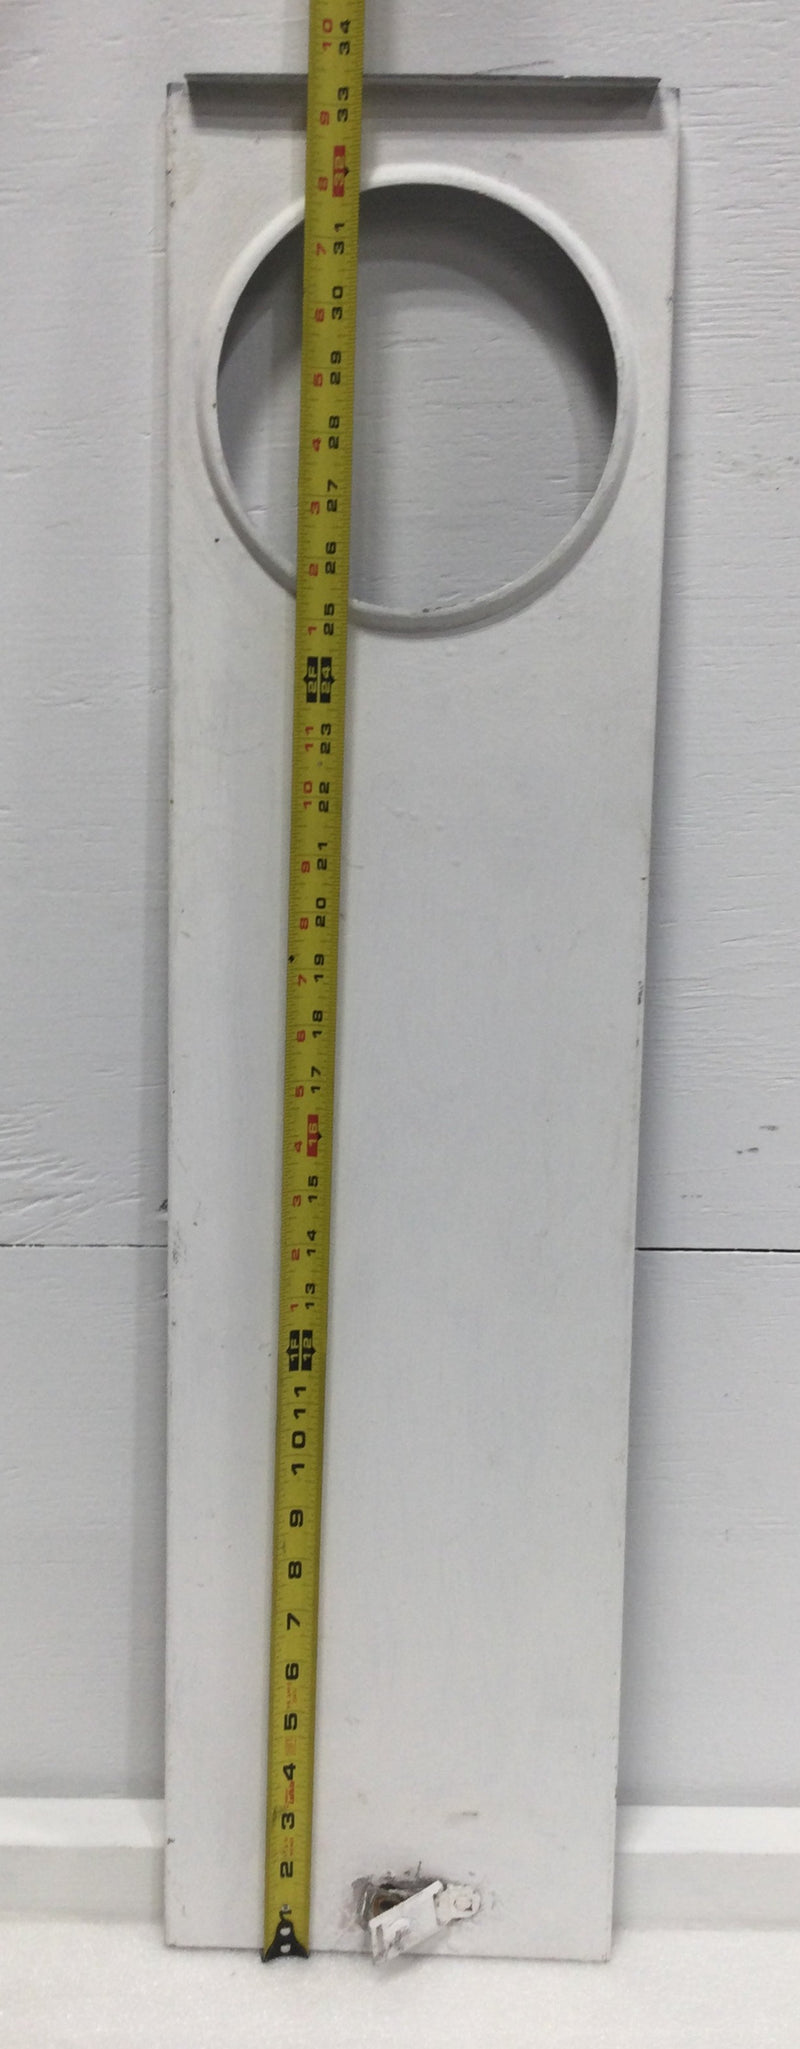 Meter Cover Only 33 1/2" x 8 1/2"